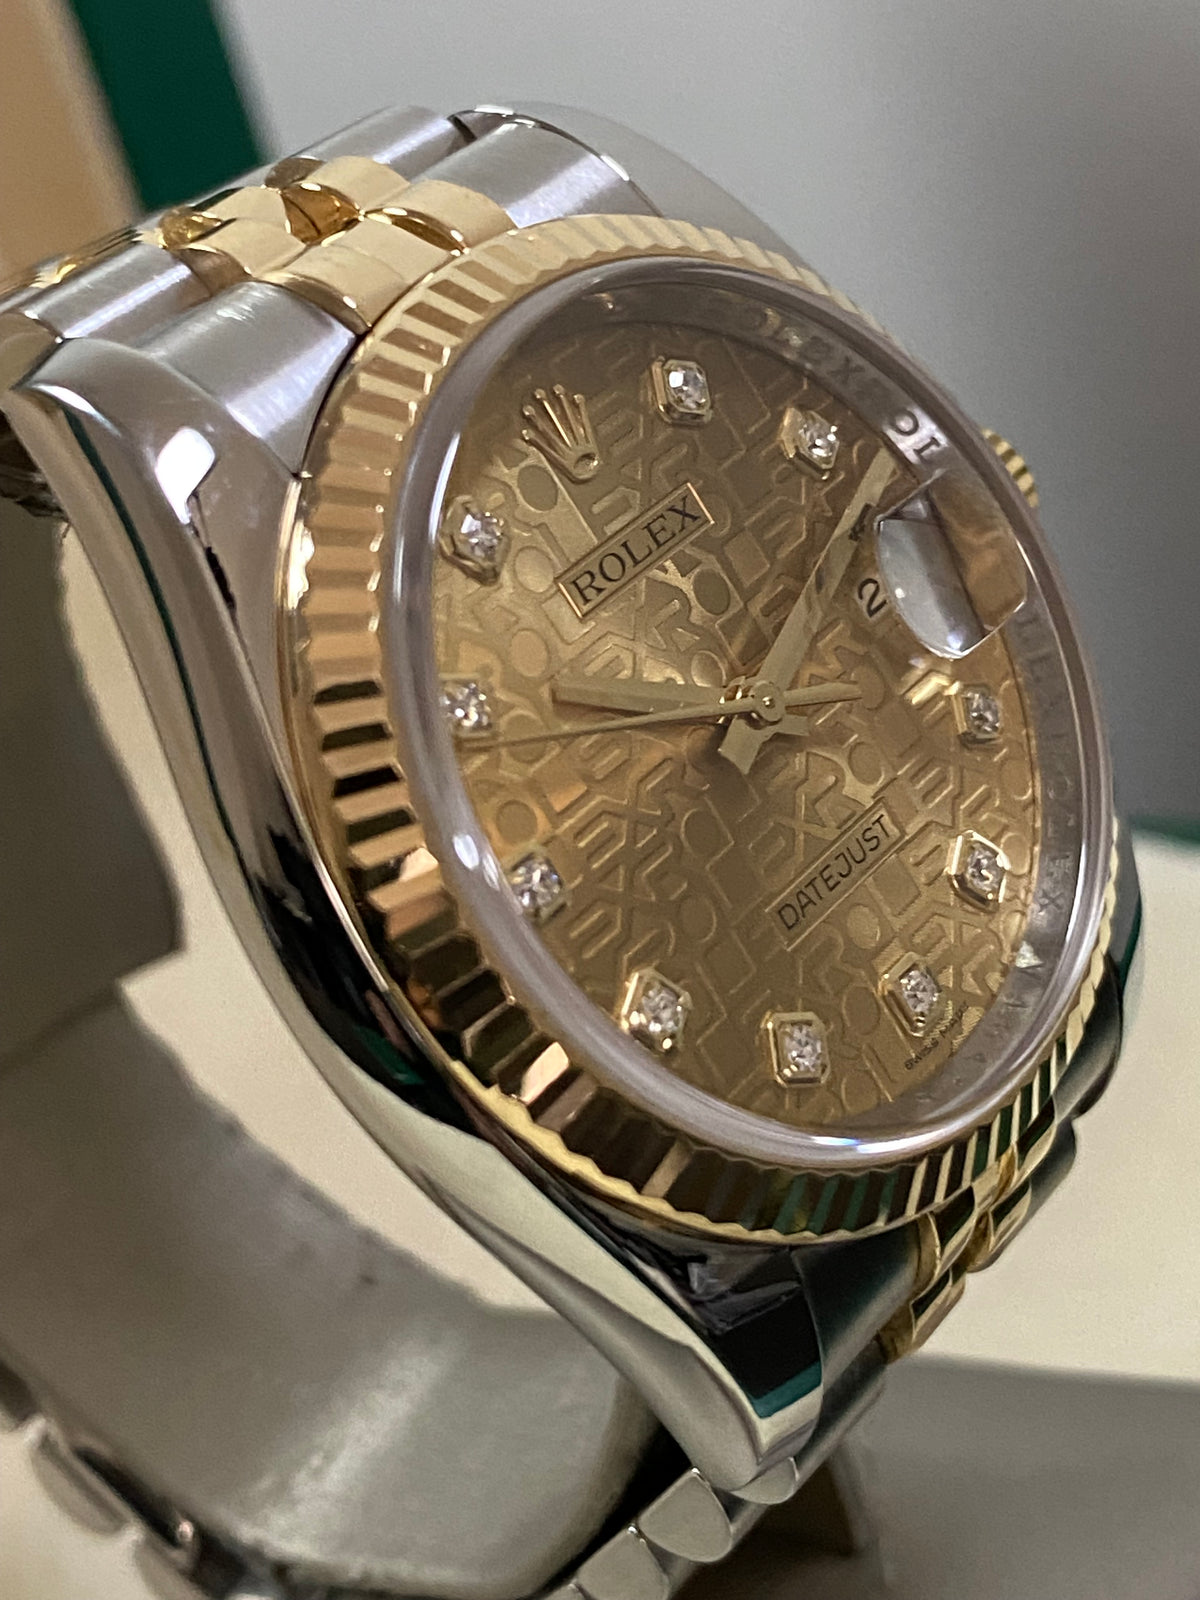 Rolex Steel and Yellow Gold Datejust 36 - V Serial - Fluted Bezel - Factory Diamond Dial - Jubilee Bracelet - 116233